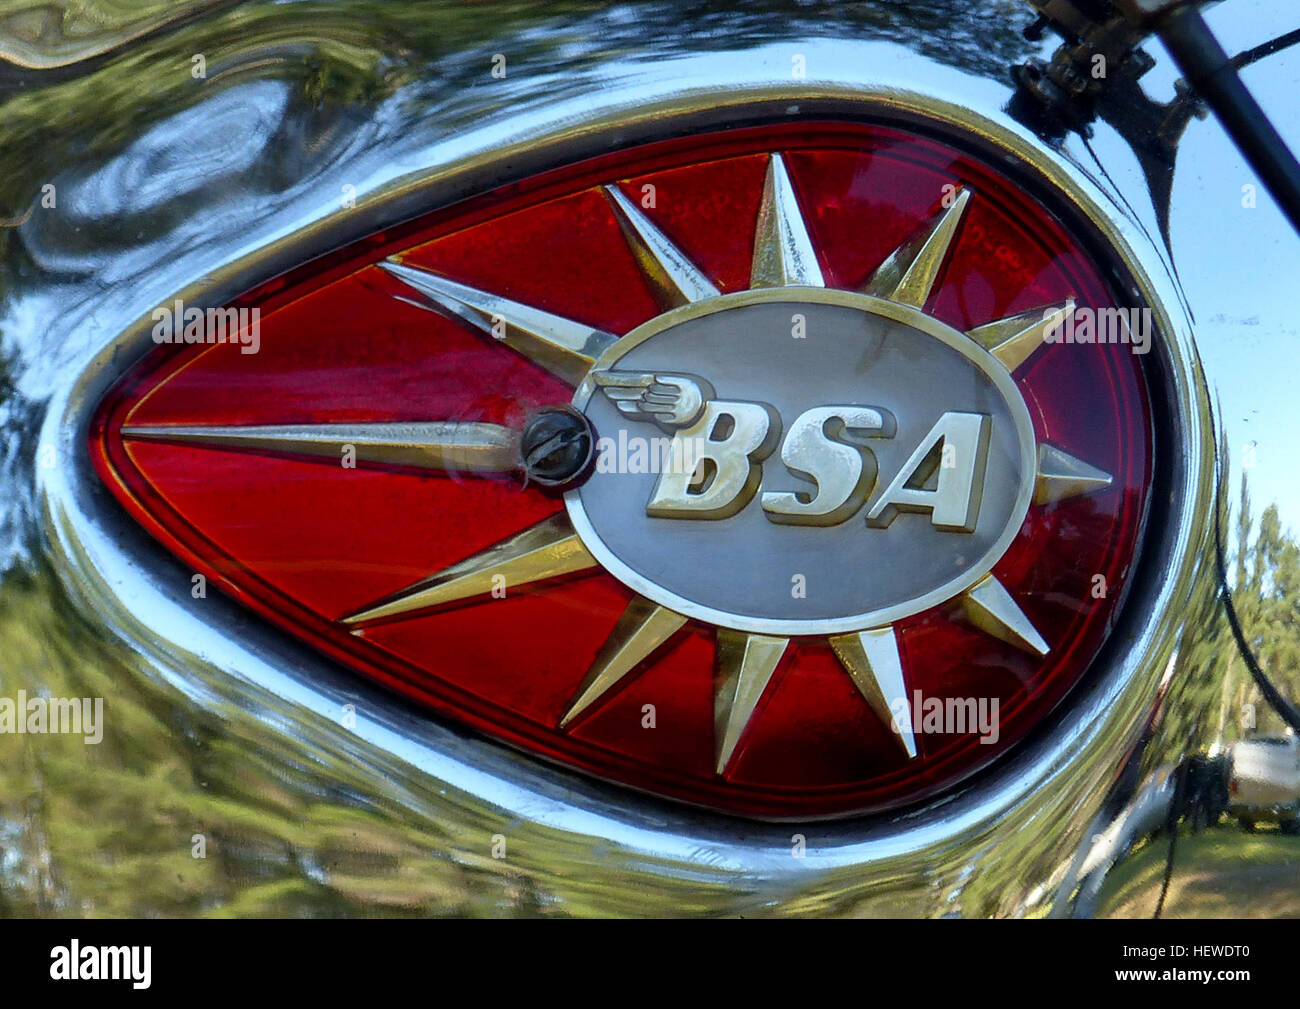 BSA's adventure began in 1861, in England, the company being founded by fourteen gunsmiths of the Birmingham Small Arms Trade Association, who had supplied arms to the British government during the Crimean War. As the gun trade declined, they began to manufacture bicycles in 1880. The first motorcycle was produced in 1903 and the first automobile prototype saw the light in 1907. The BSA automobile was, for sure, a success, if we take into consideration the fact that in 1908 there were already 150 vehicles on the streets. In 1920, the company bought some assets of the Aircraft Manufacturing Com Stock Photo